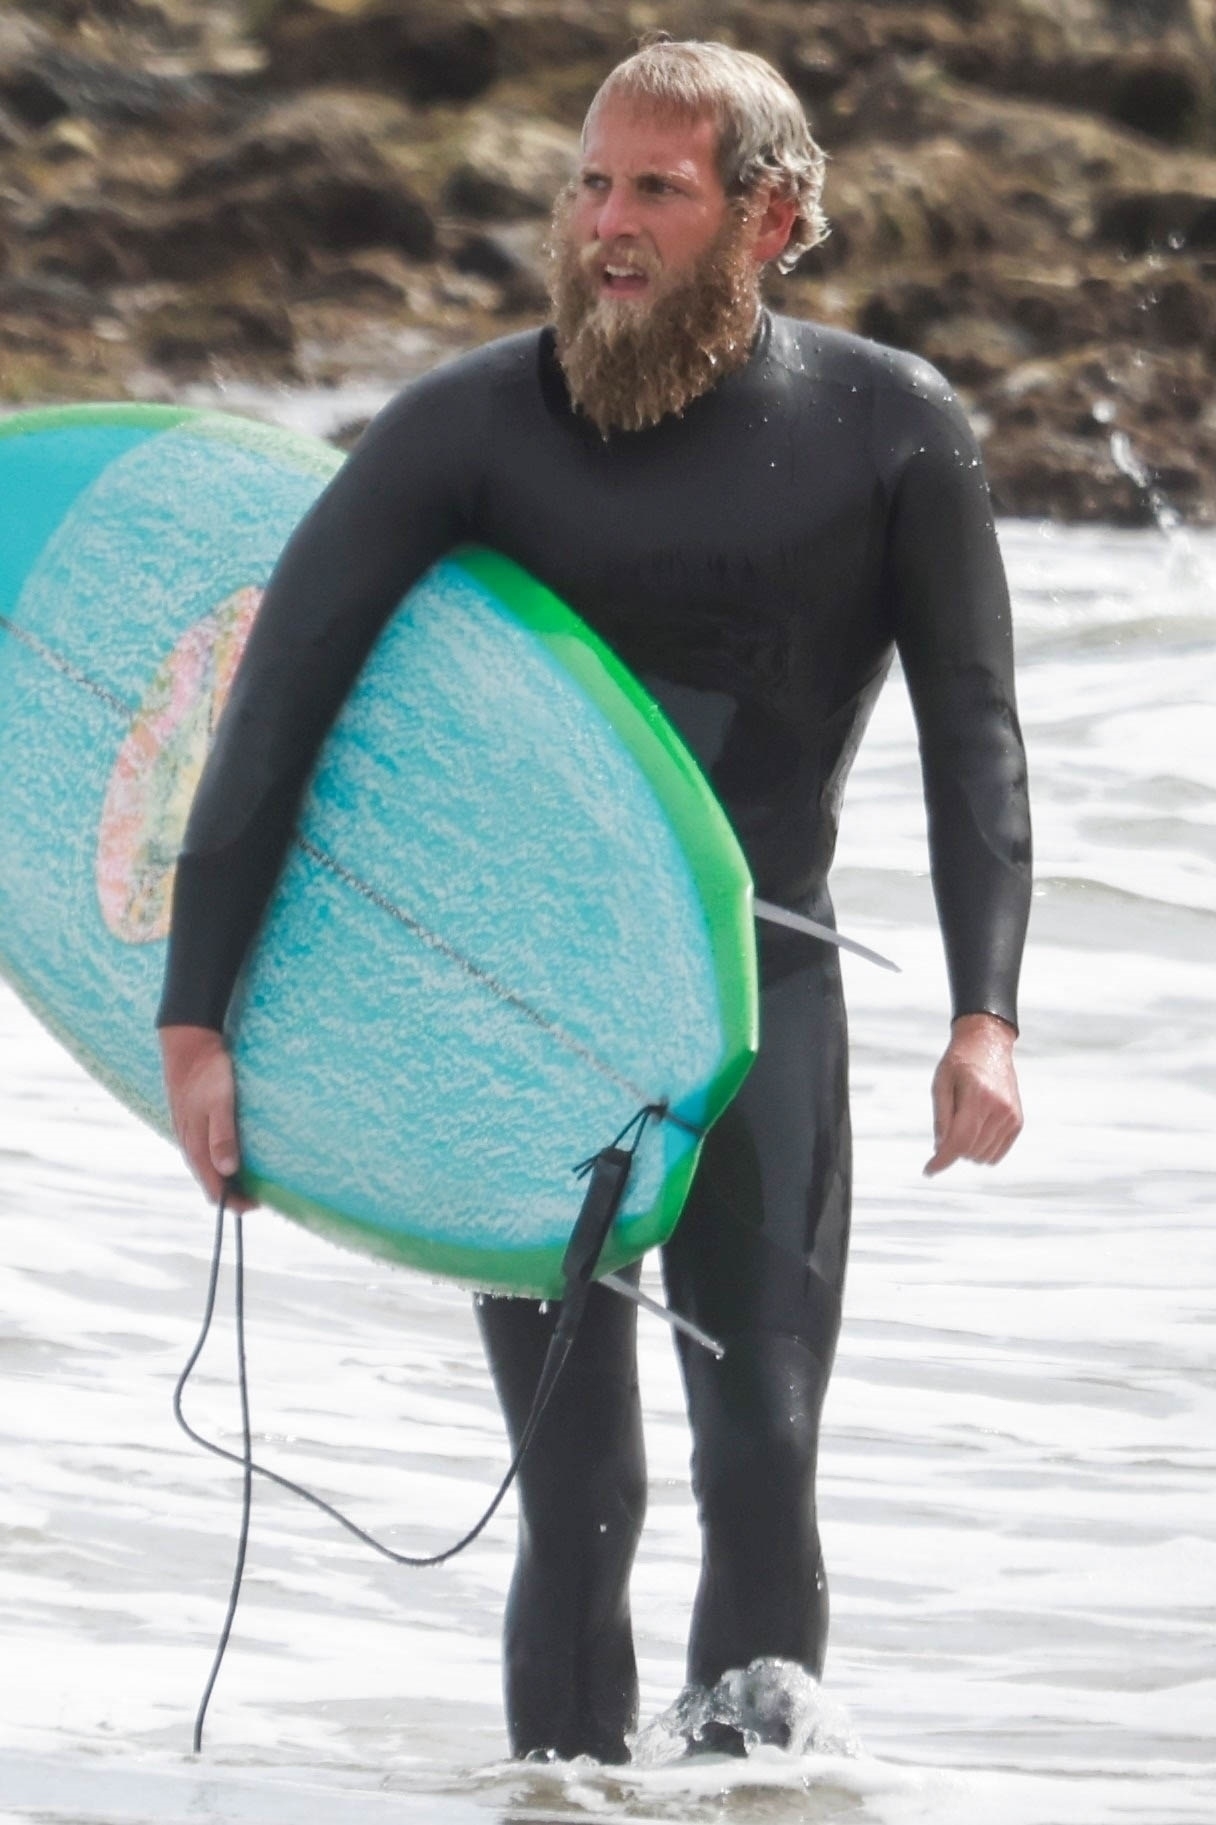 <p><a href="https://www.wonderwall.com/celebrity/profiles/overview/jonah-hill-587.article">Jonah Hill</a> spent the morning showing off his surfing skills in Malibu on April 22. </p>